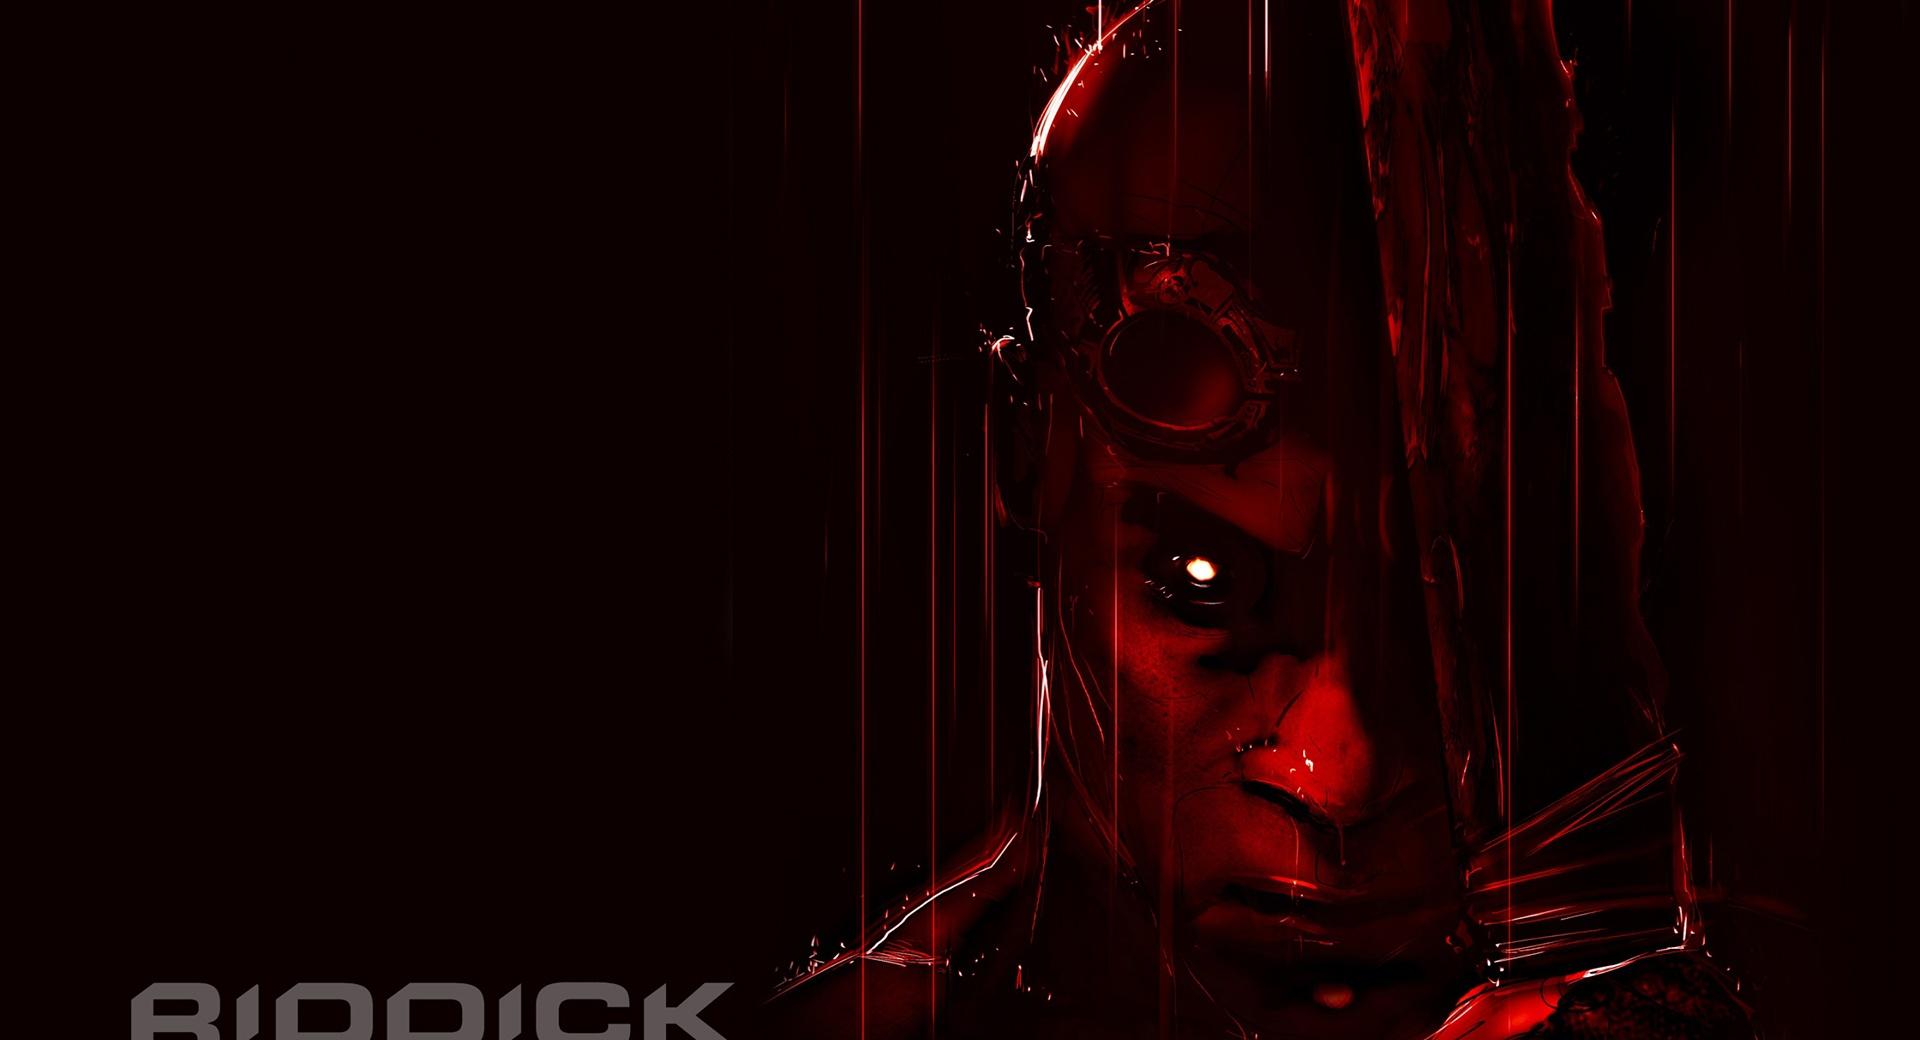 Riddick Rule The Dark wallpapers HD quality